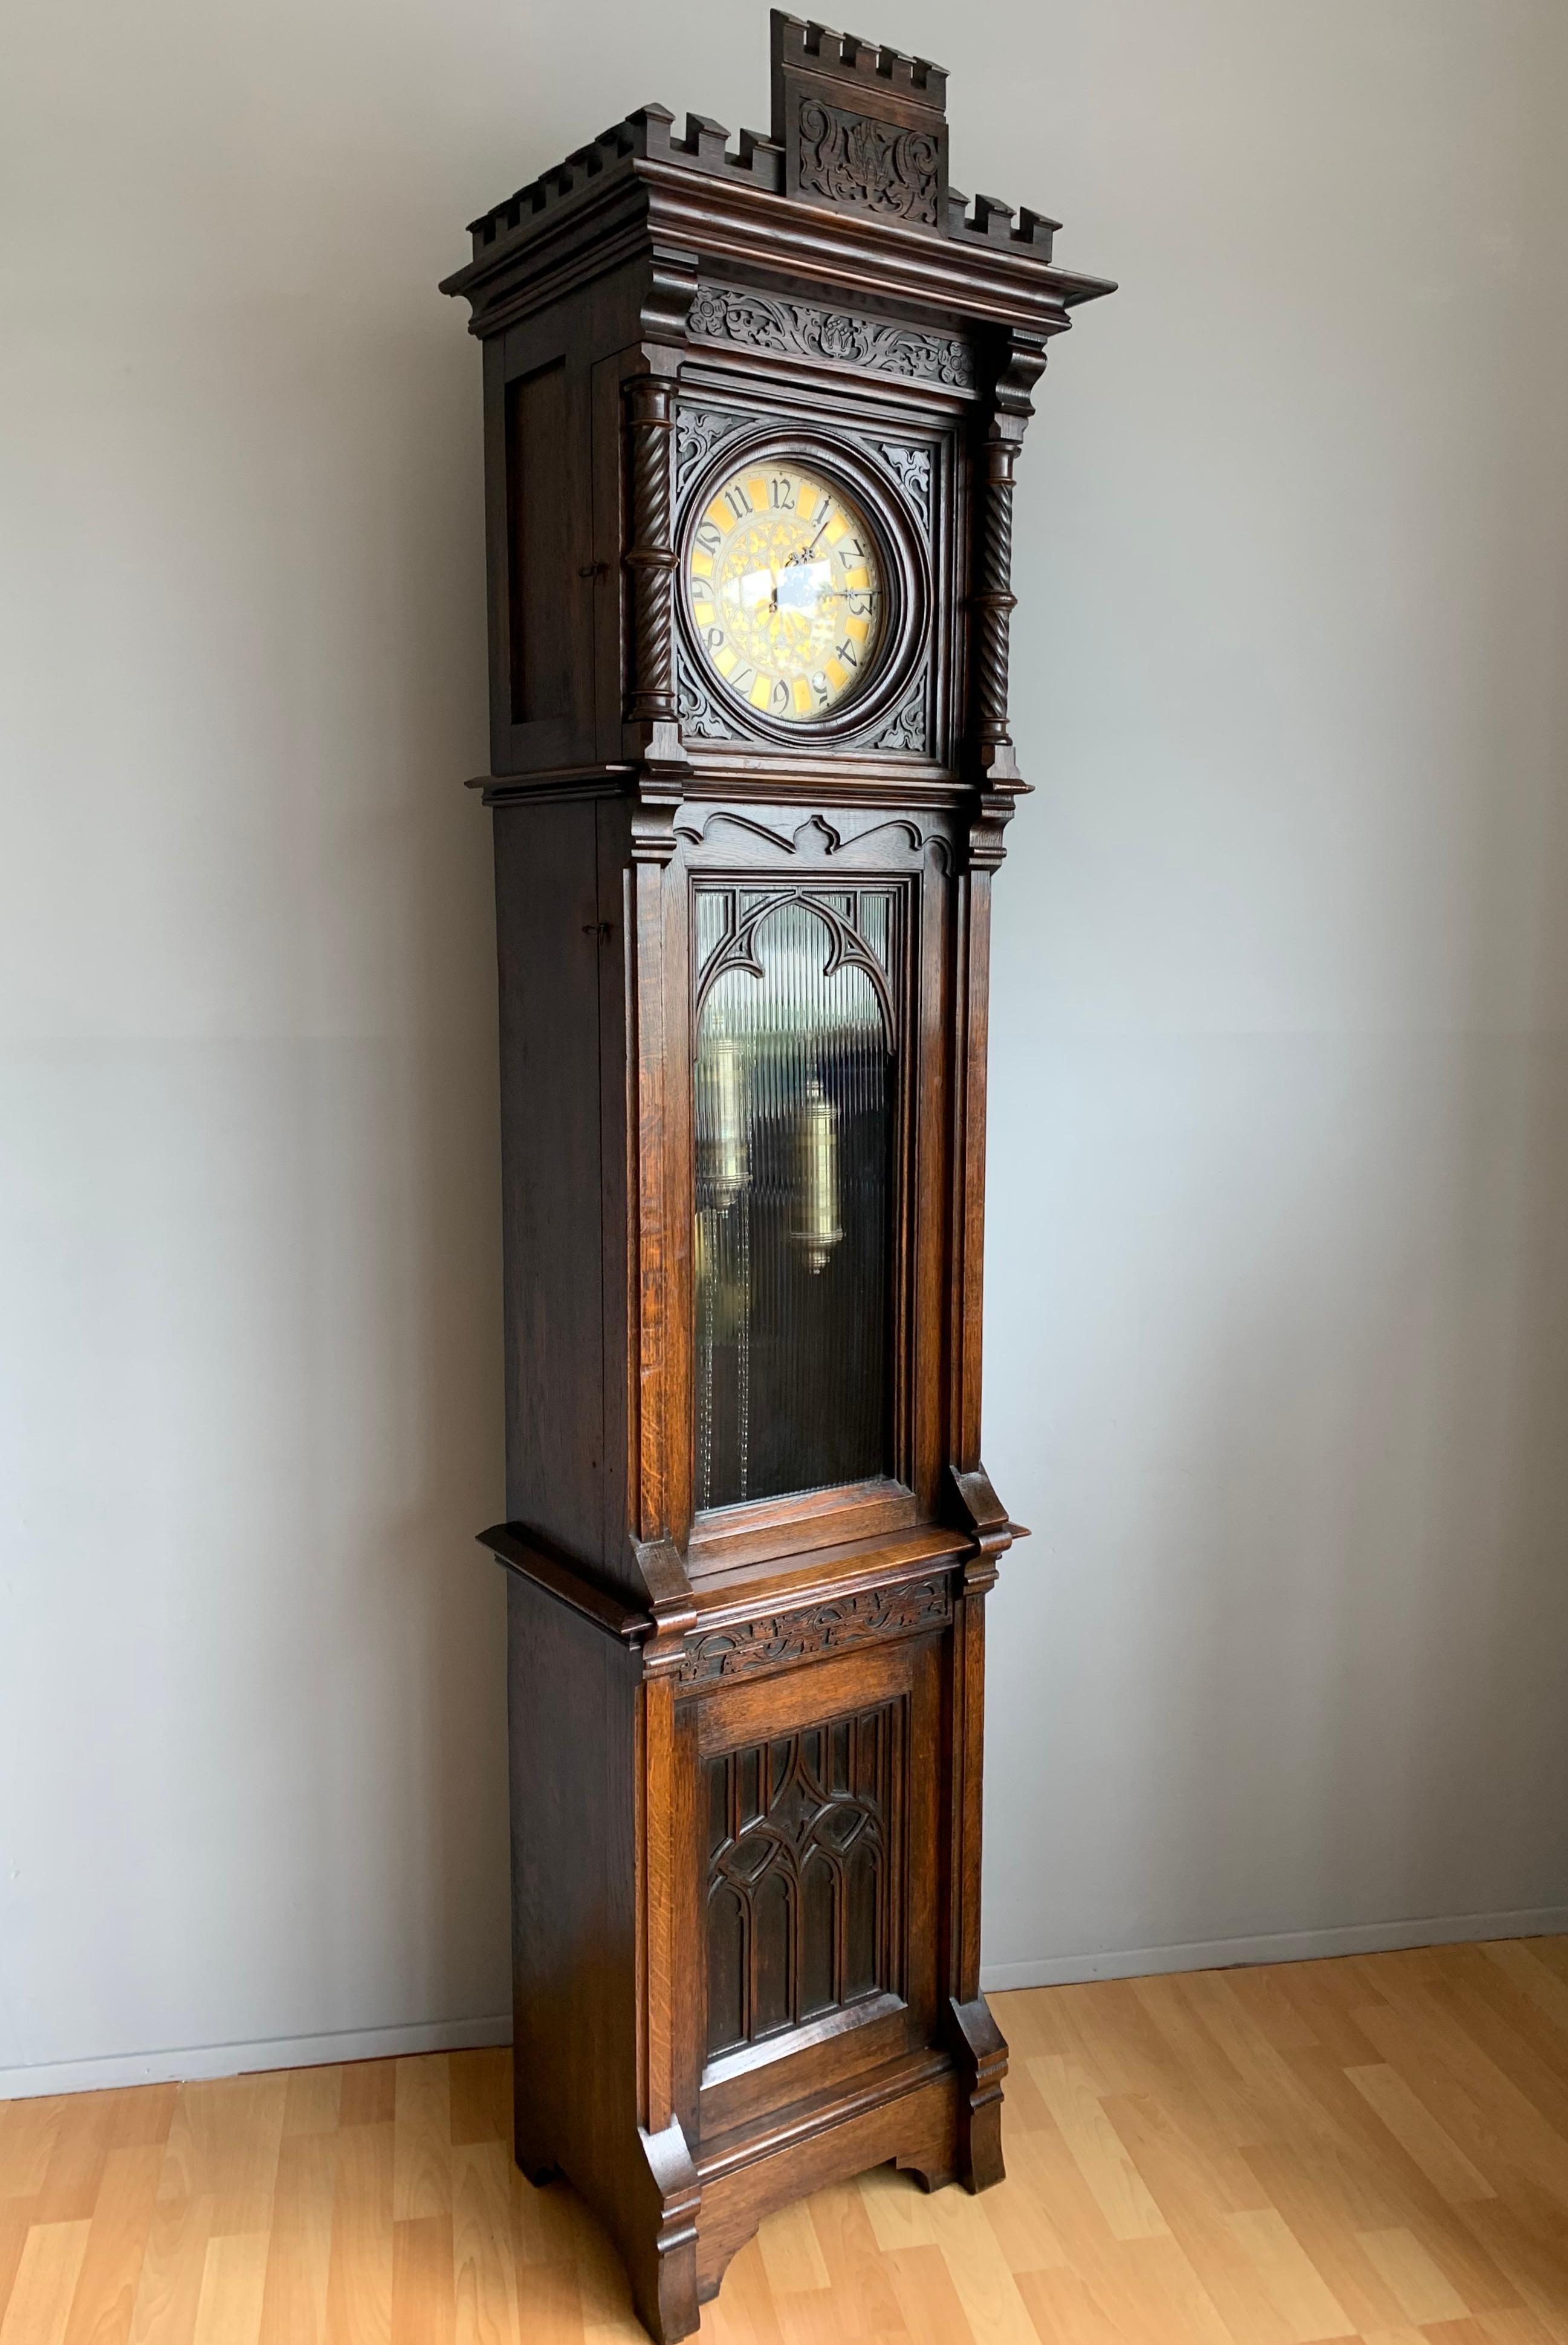 European Antique and Unique, Hand Carved Gothic Revival Grandfather or Longcase Clock